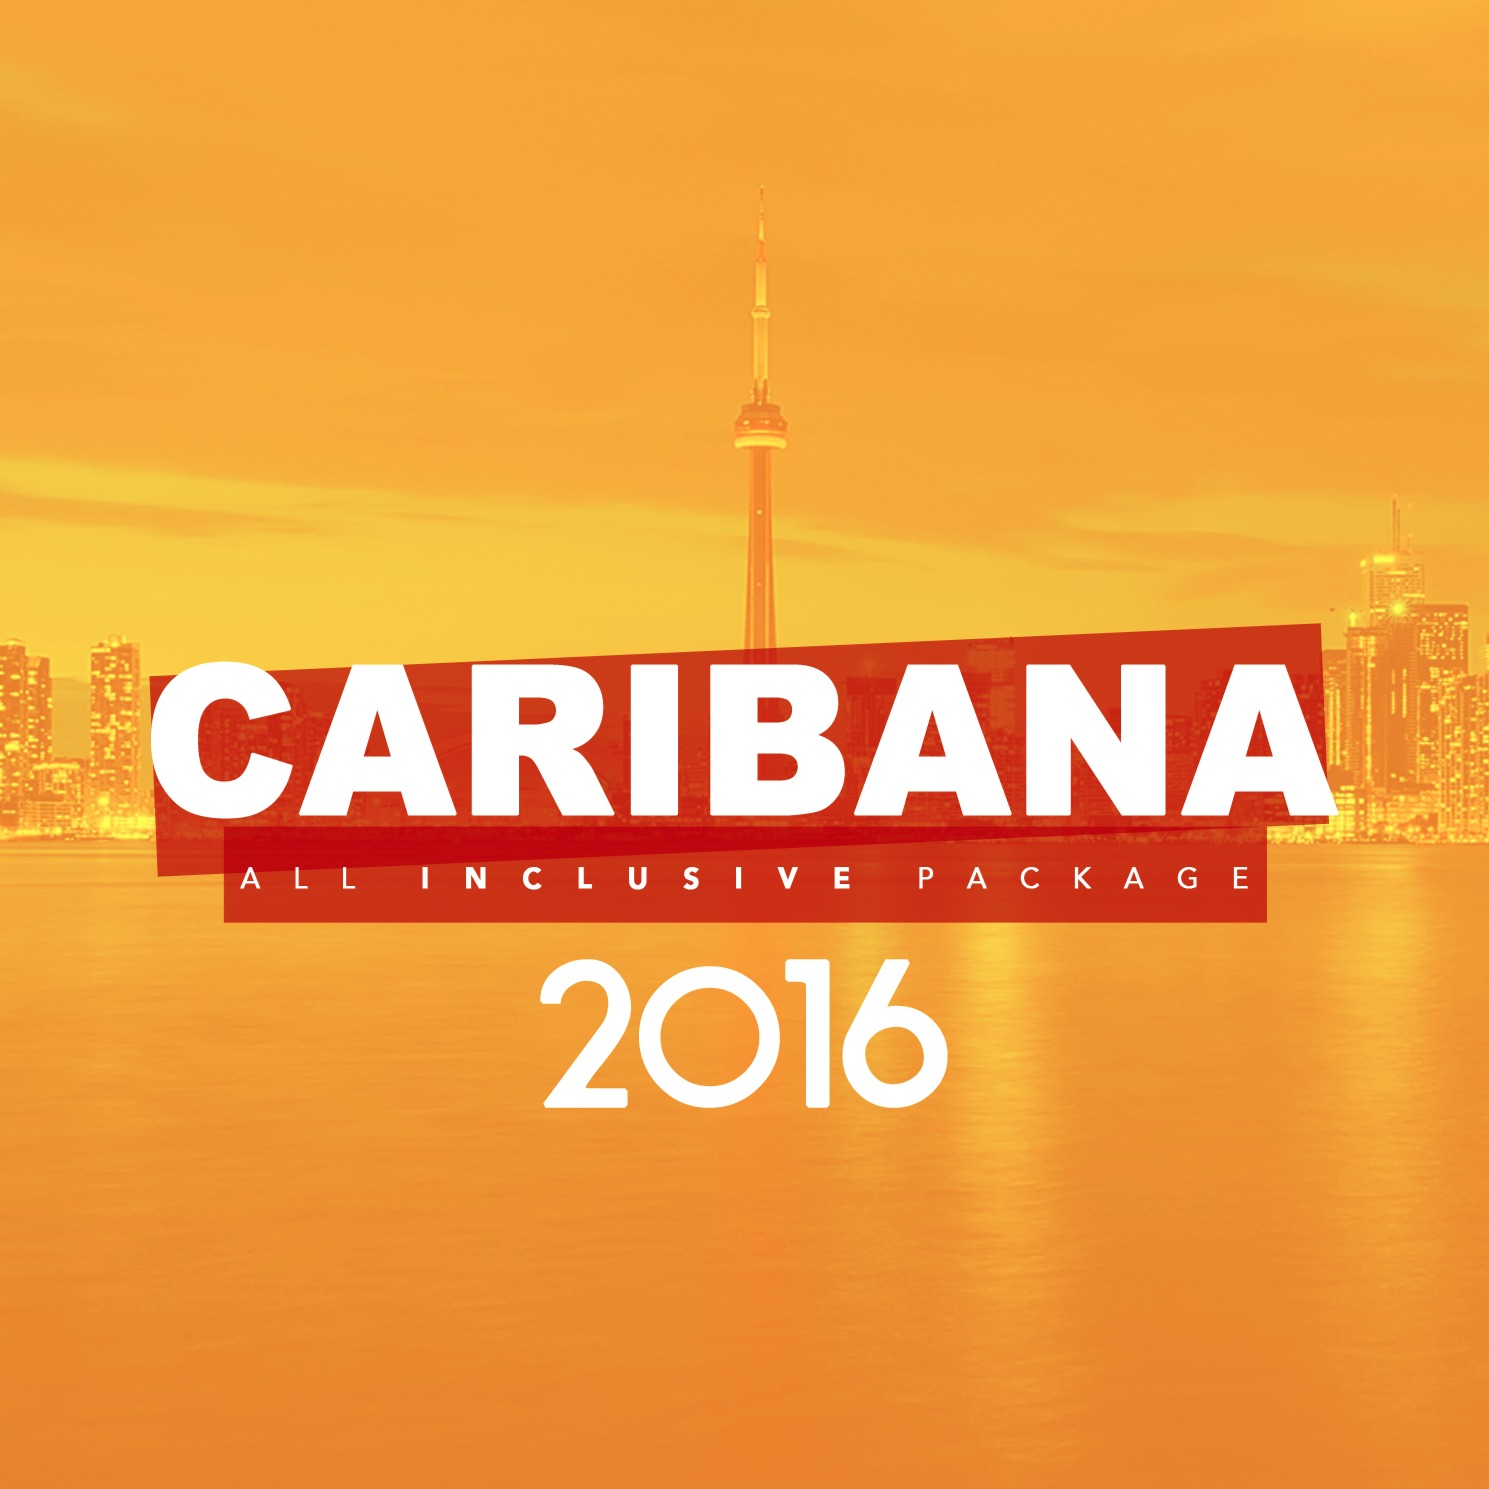 CARIBANA 2016 ALL INCLUSIVE PACKAGE